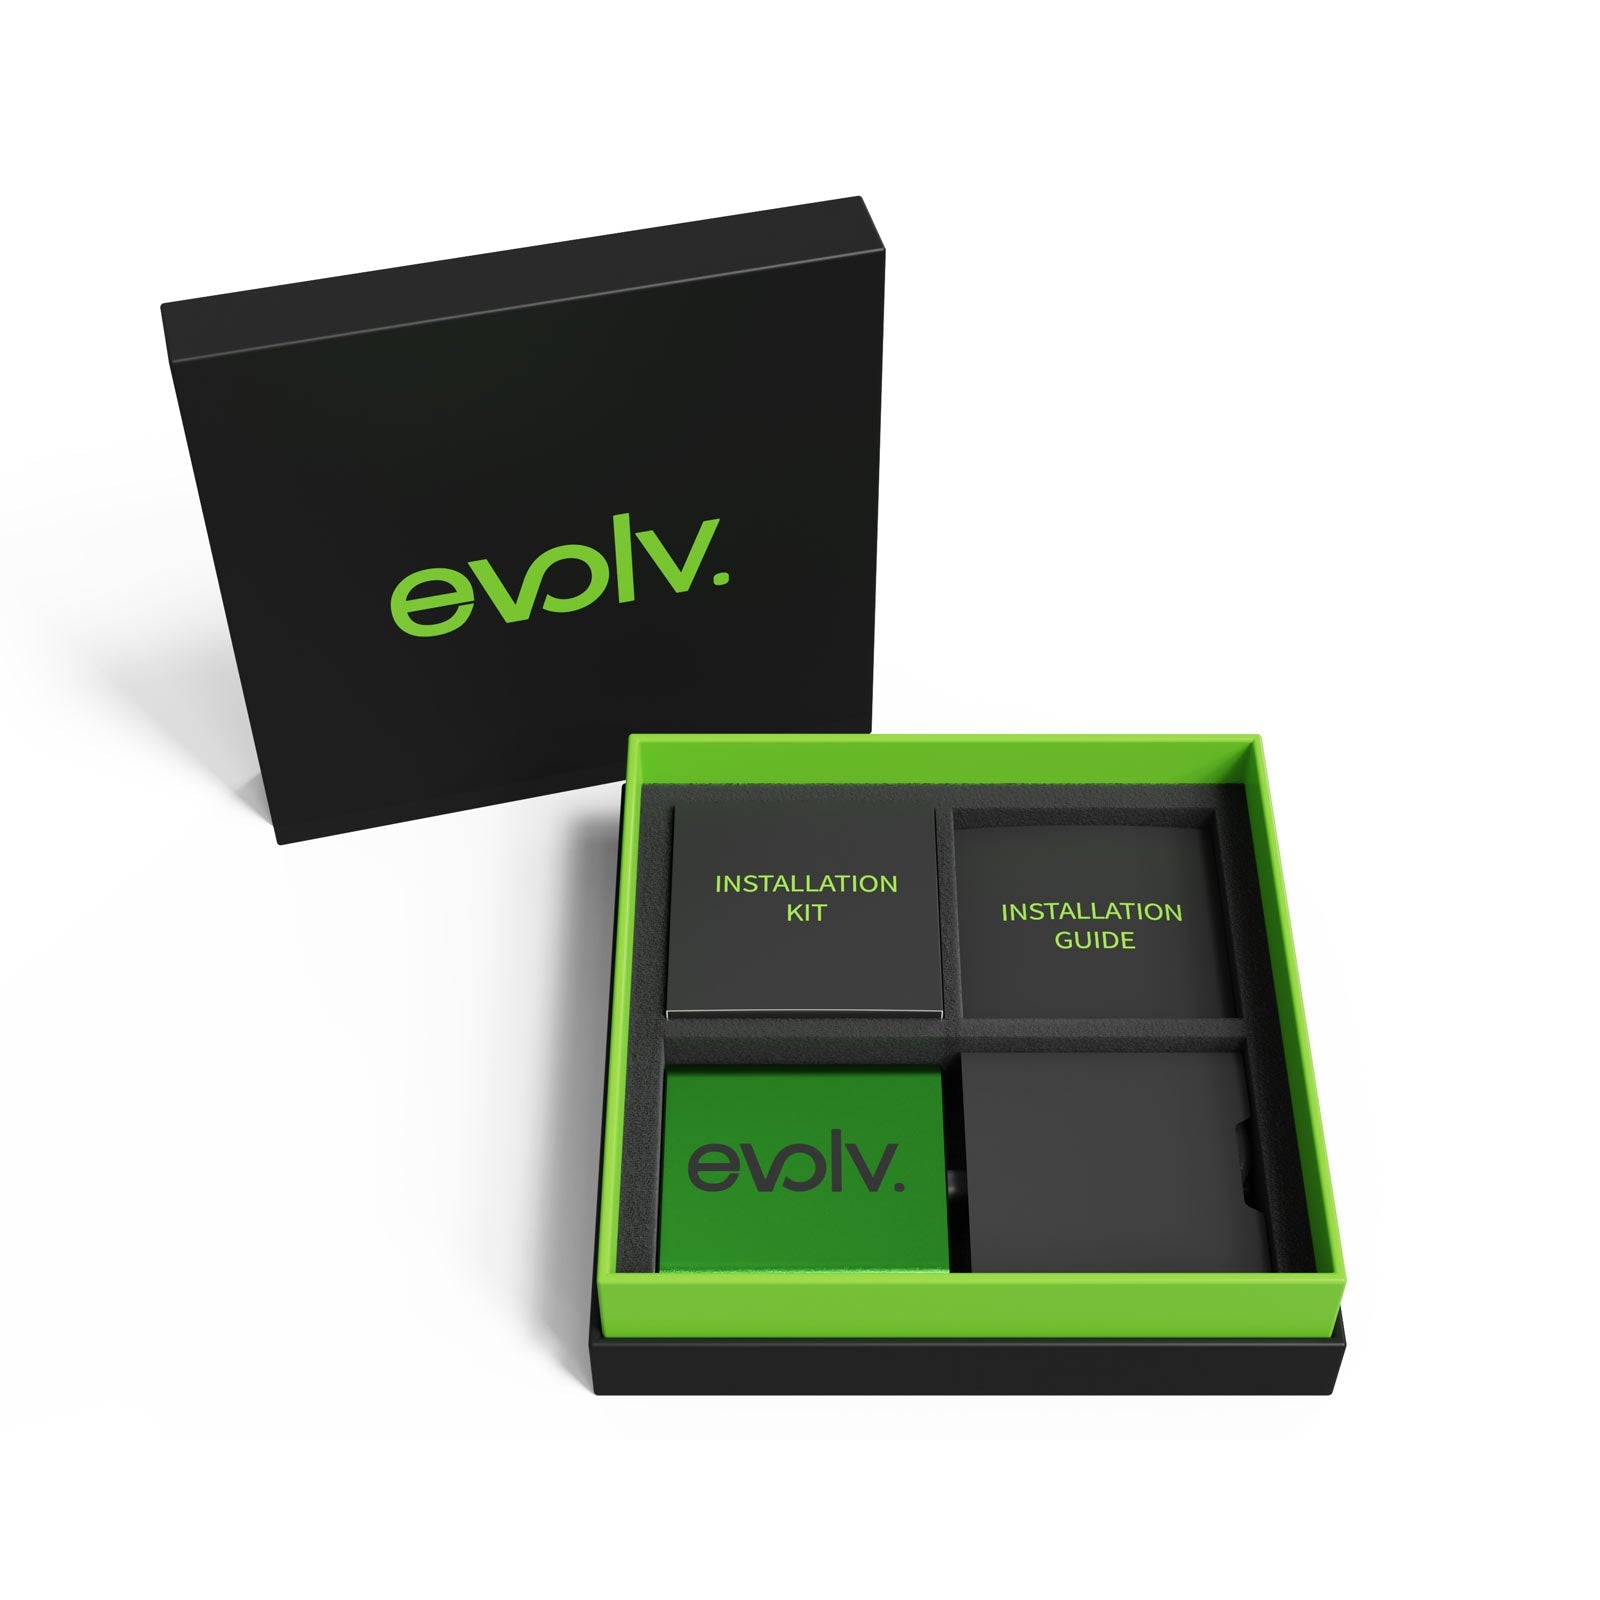 Increase your fuel mileage, performance and throttle response with an Evolv Genesis G90 Performance Chip!